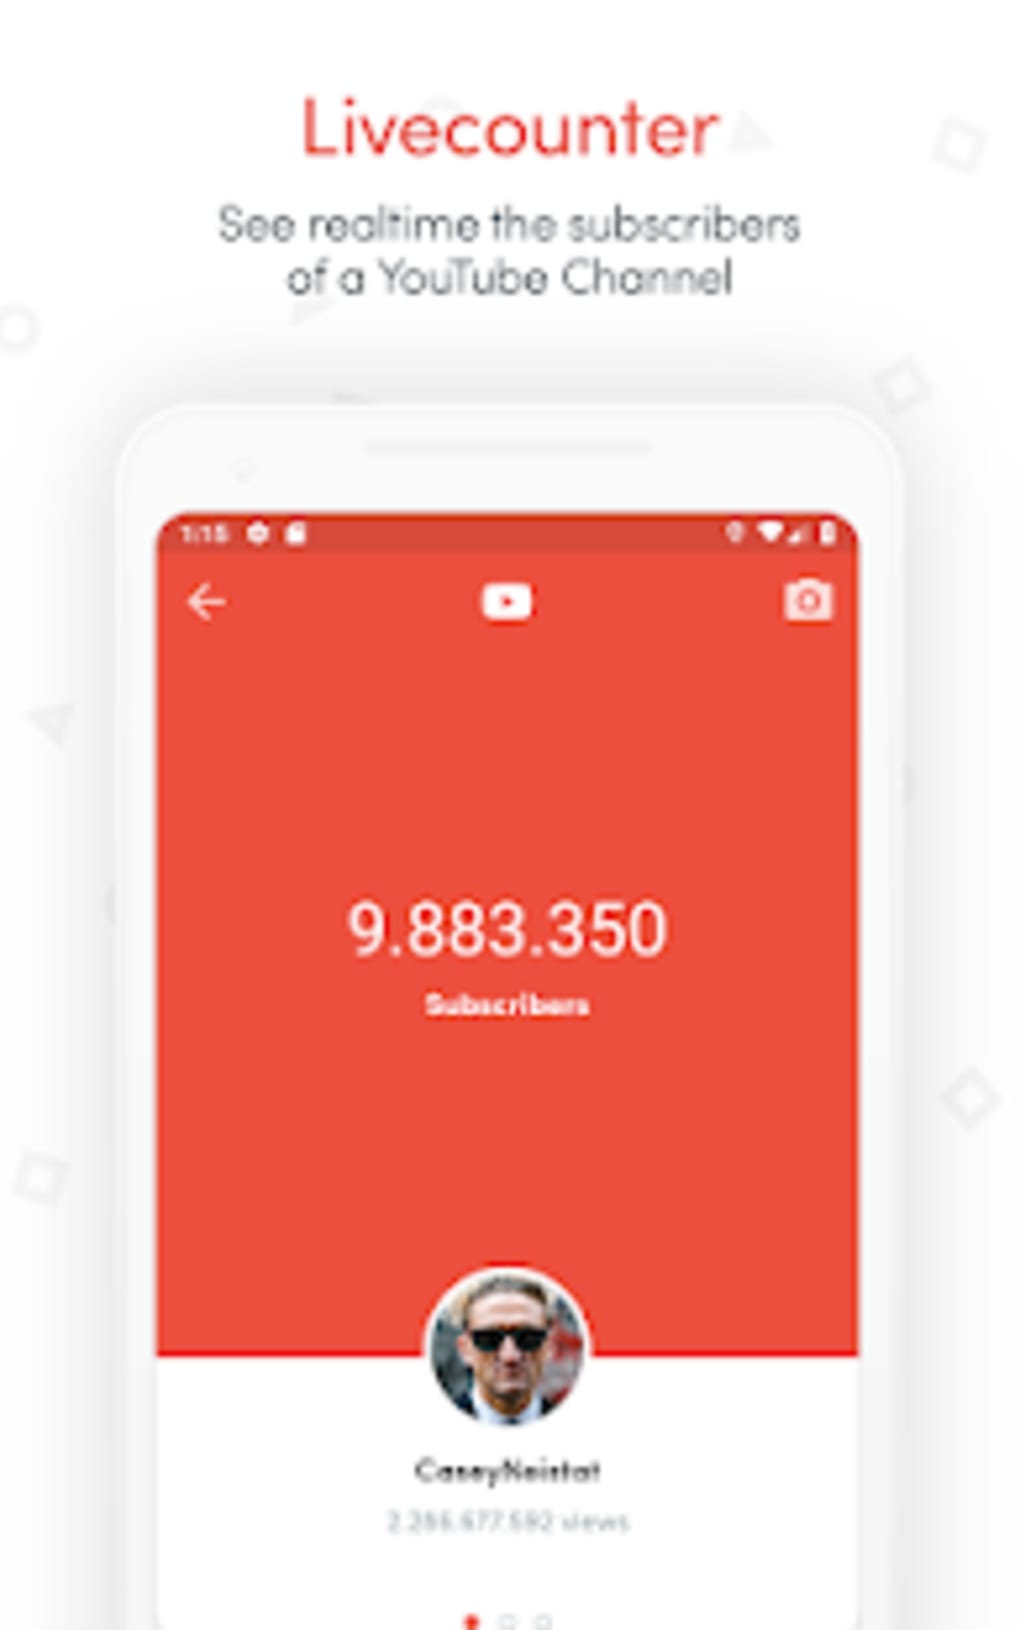 YTCount Live Subscriber Count for Android - Download